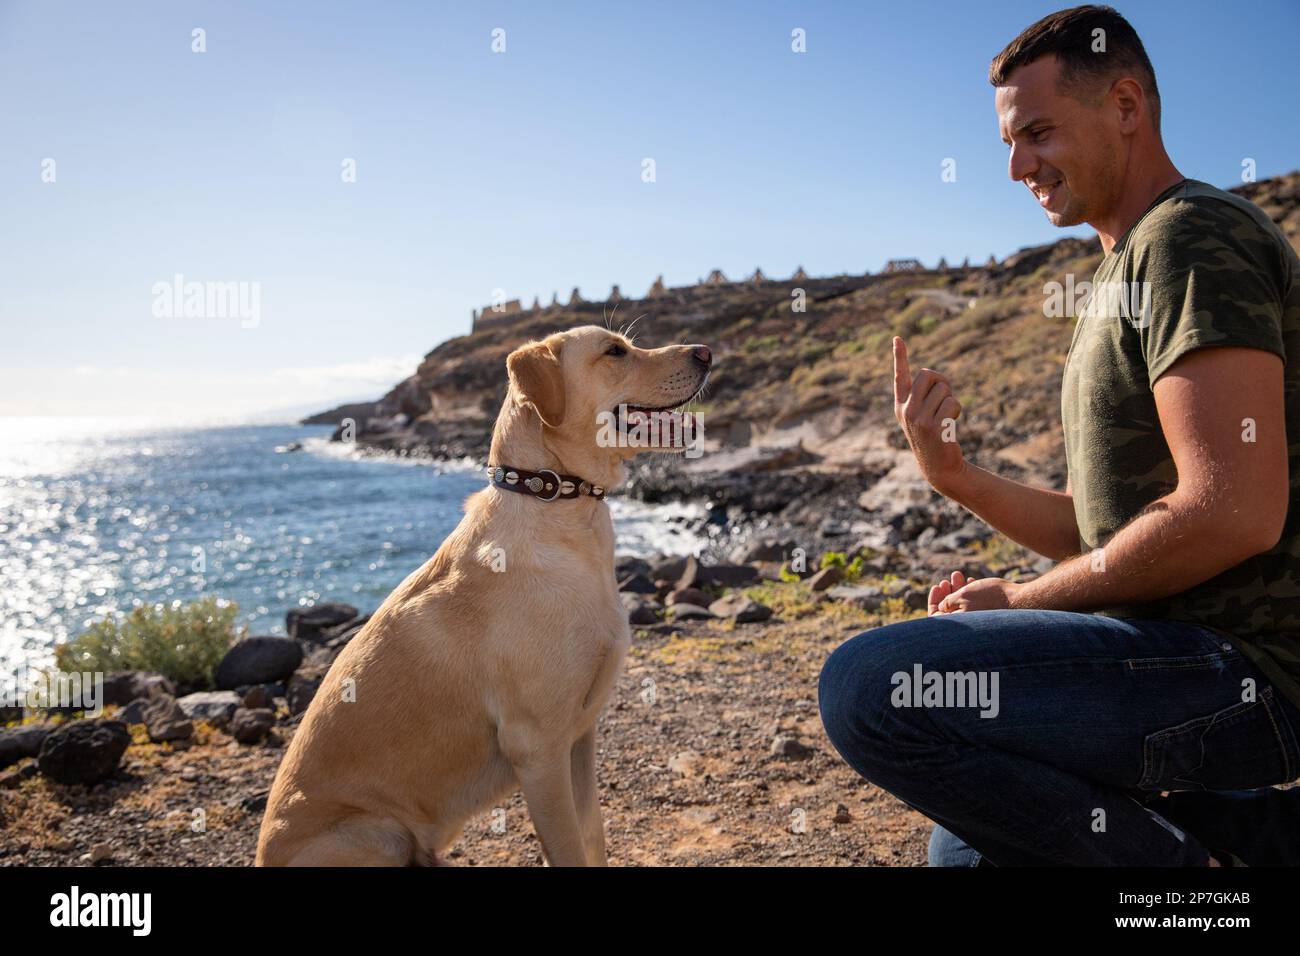 A dog trainer gestures with his hand in front of a dog during a training session. Stock Photo